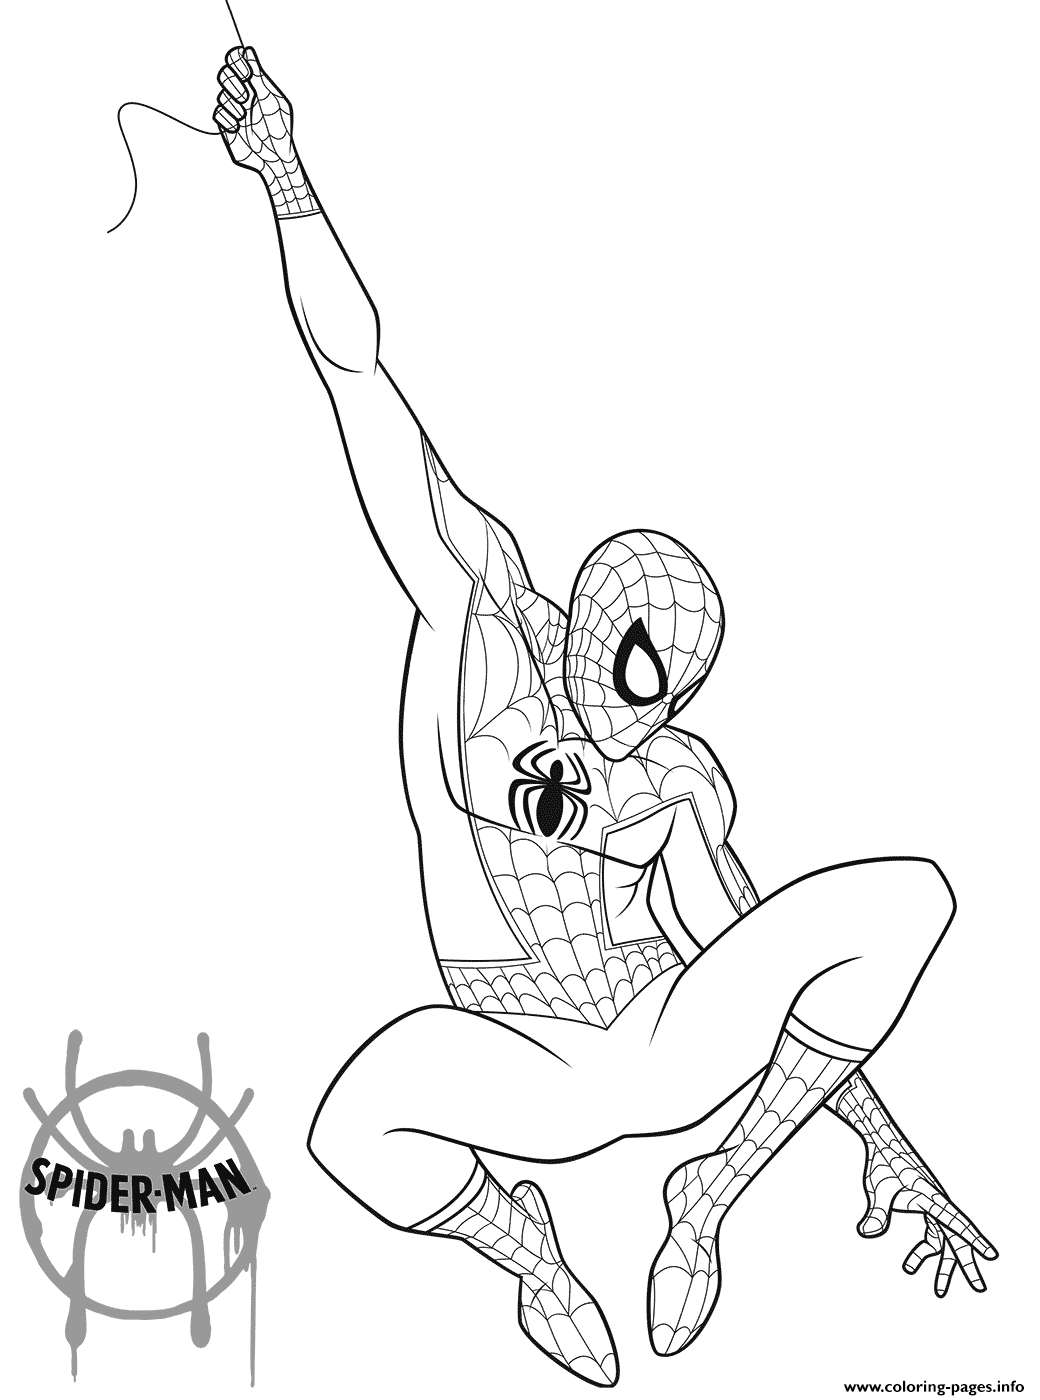 Spider Man 2018 coloring